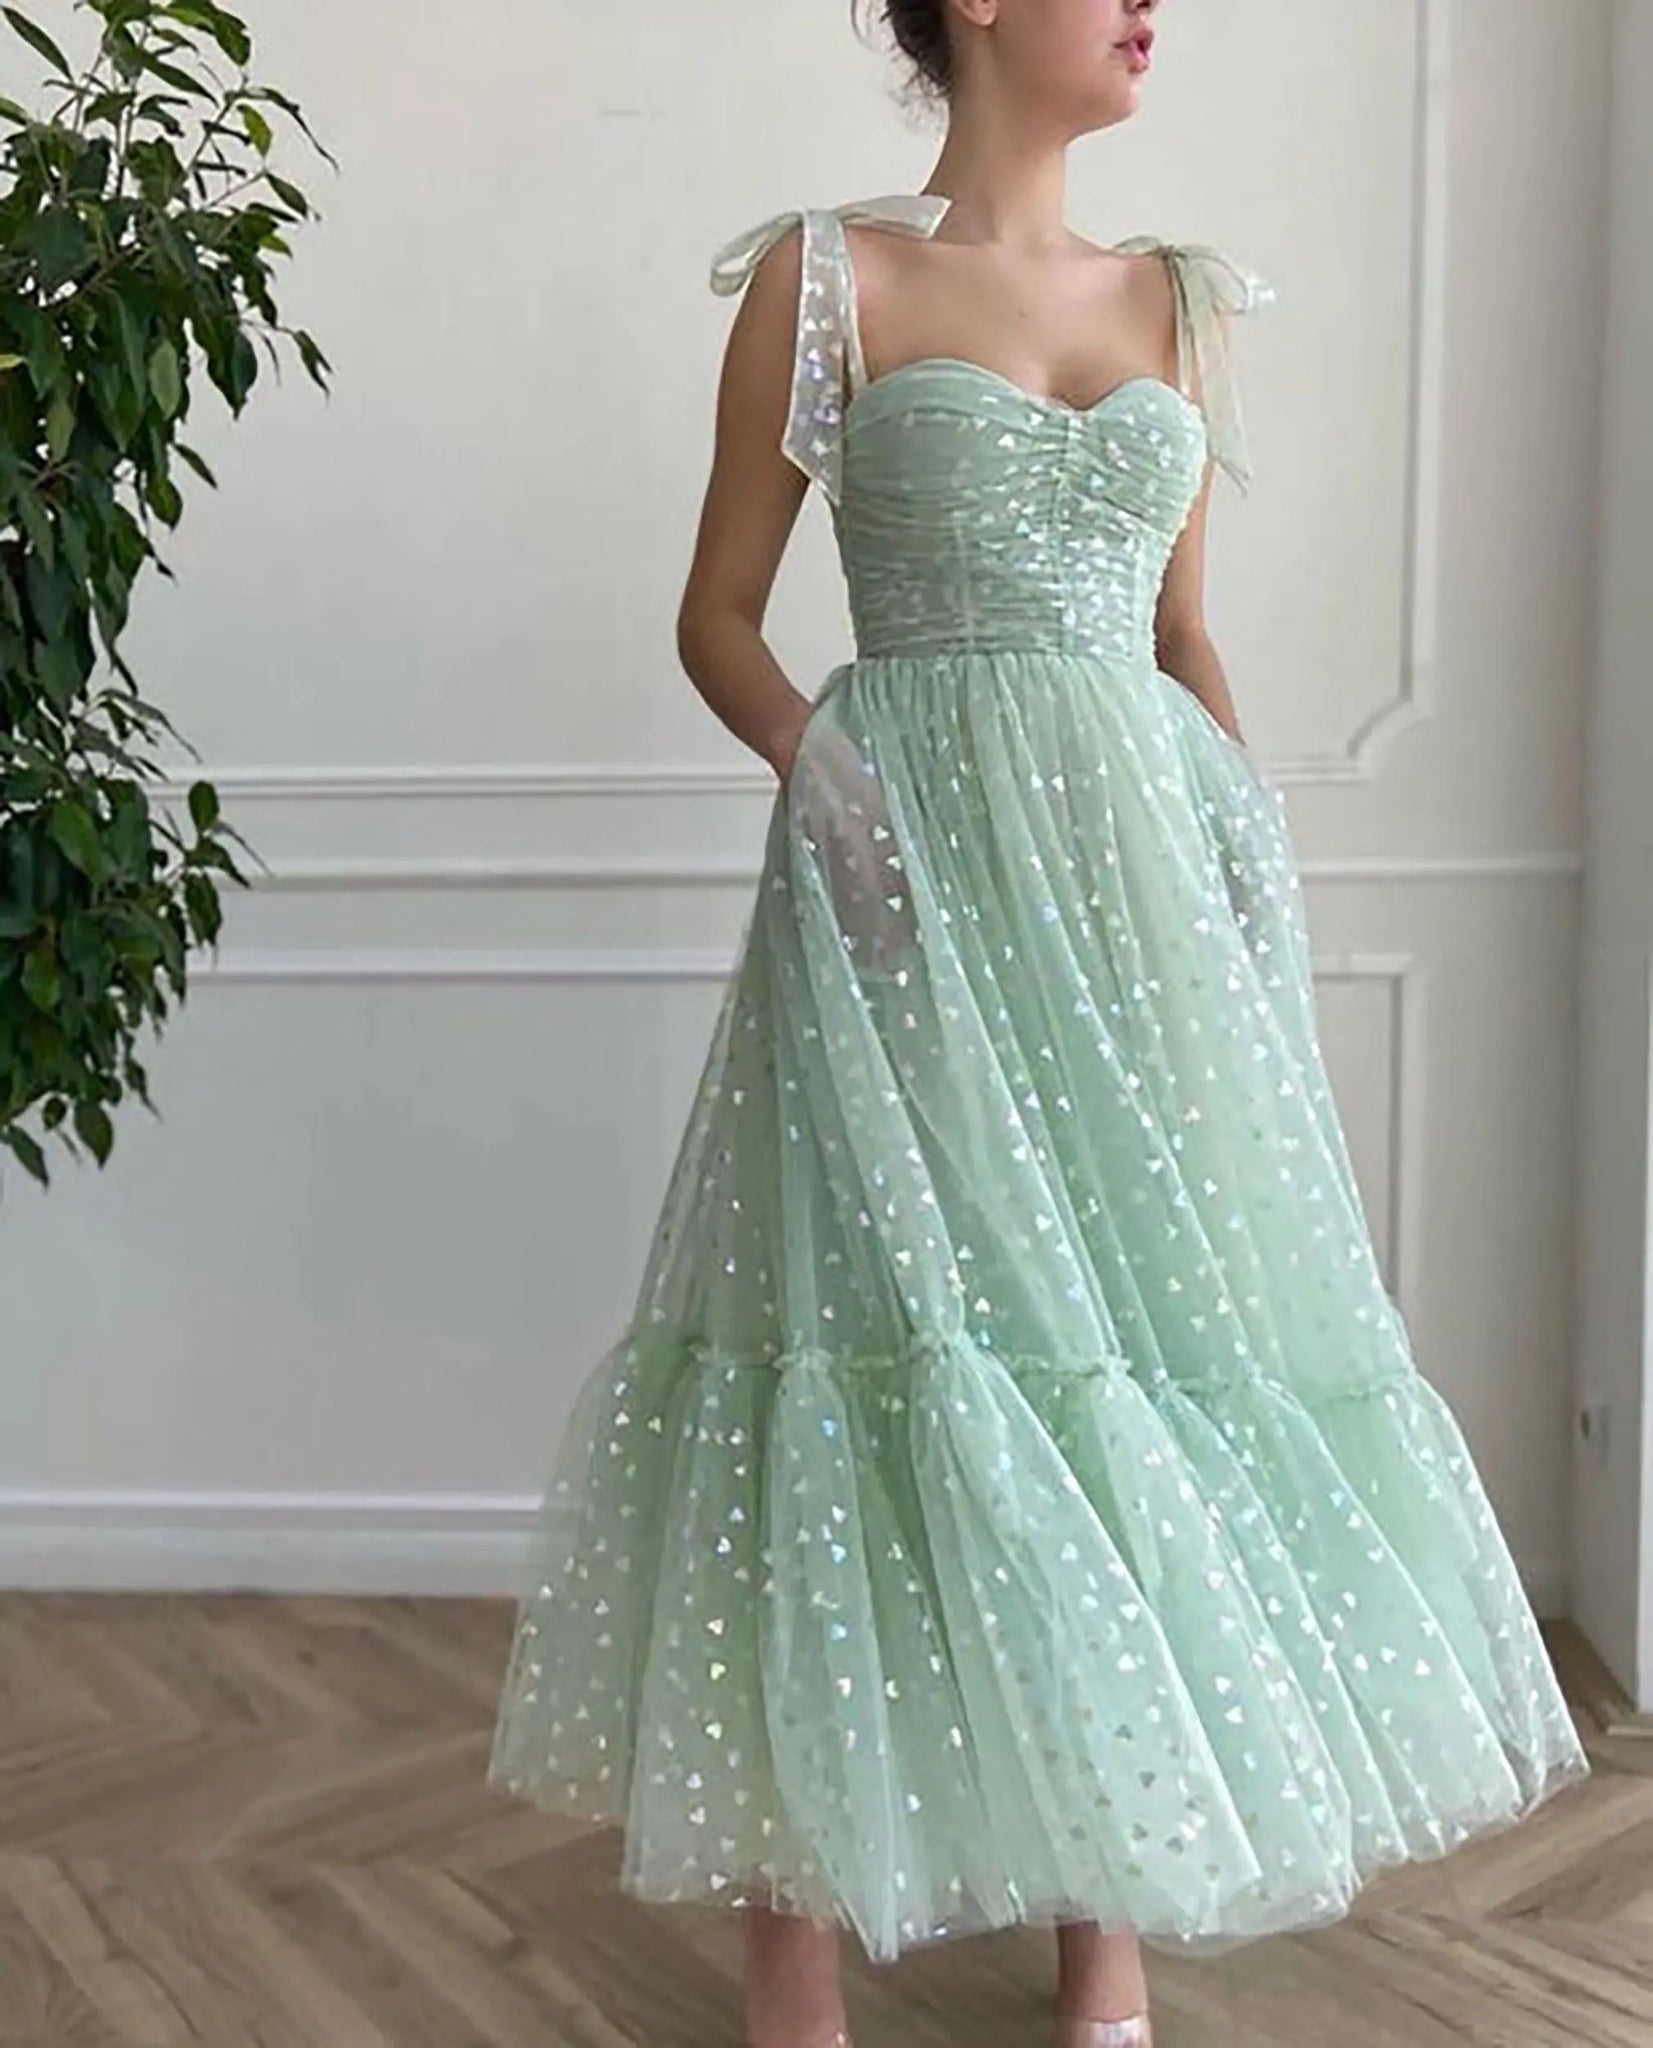 Mint A-line Fairy Glitter Tulle Ankle Length Cocktail Dress Sweetheart Bow Straps Birthday Gown with Pockets